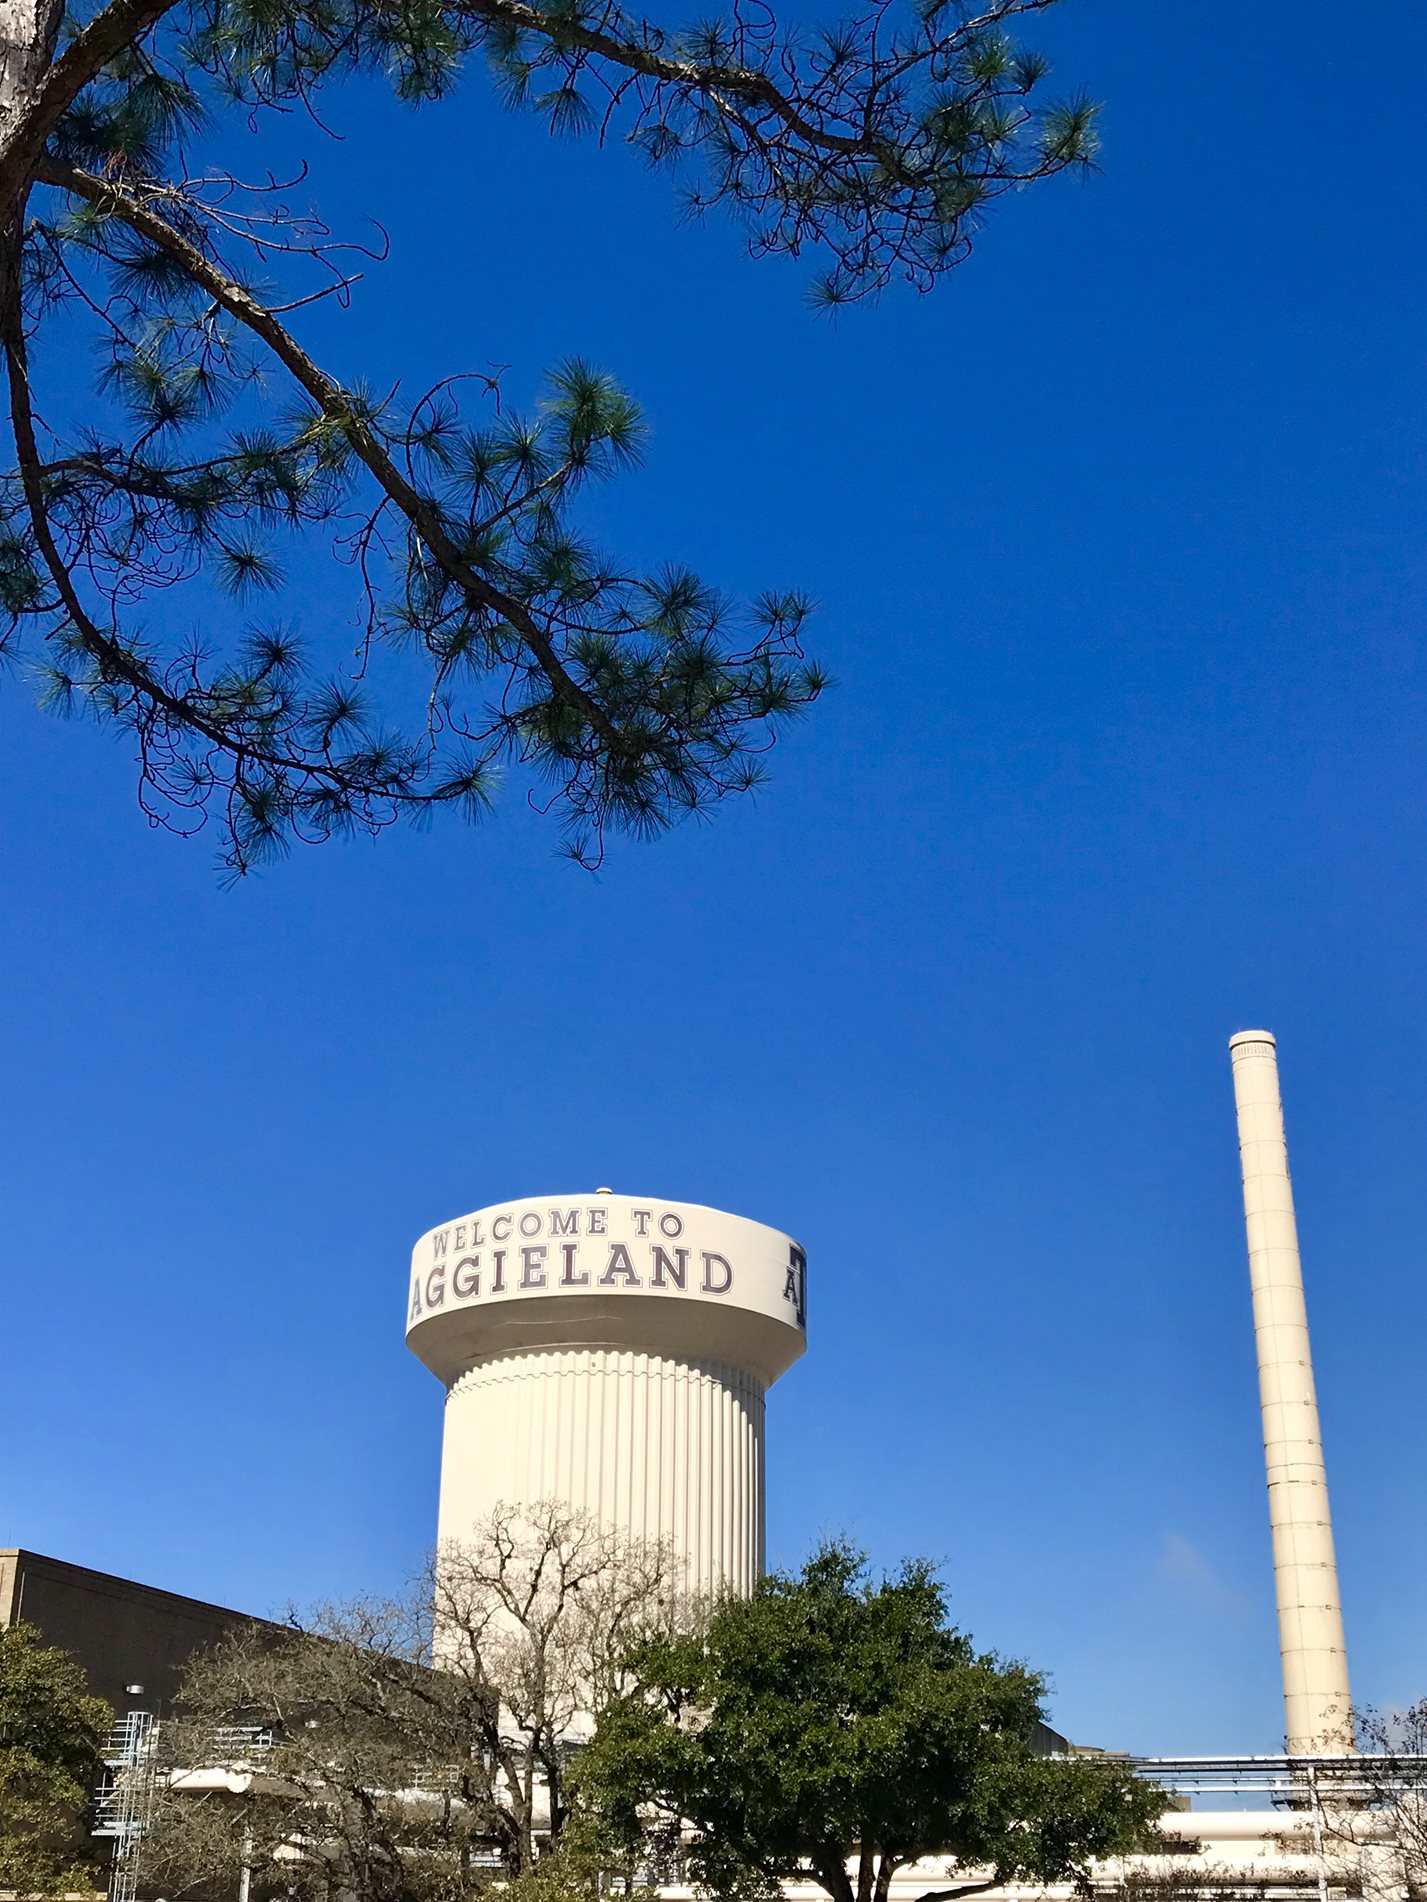 The Welcome to Aggieland water tower against a blue sky.